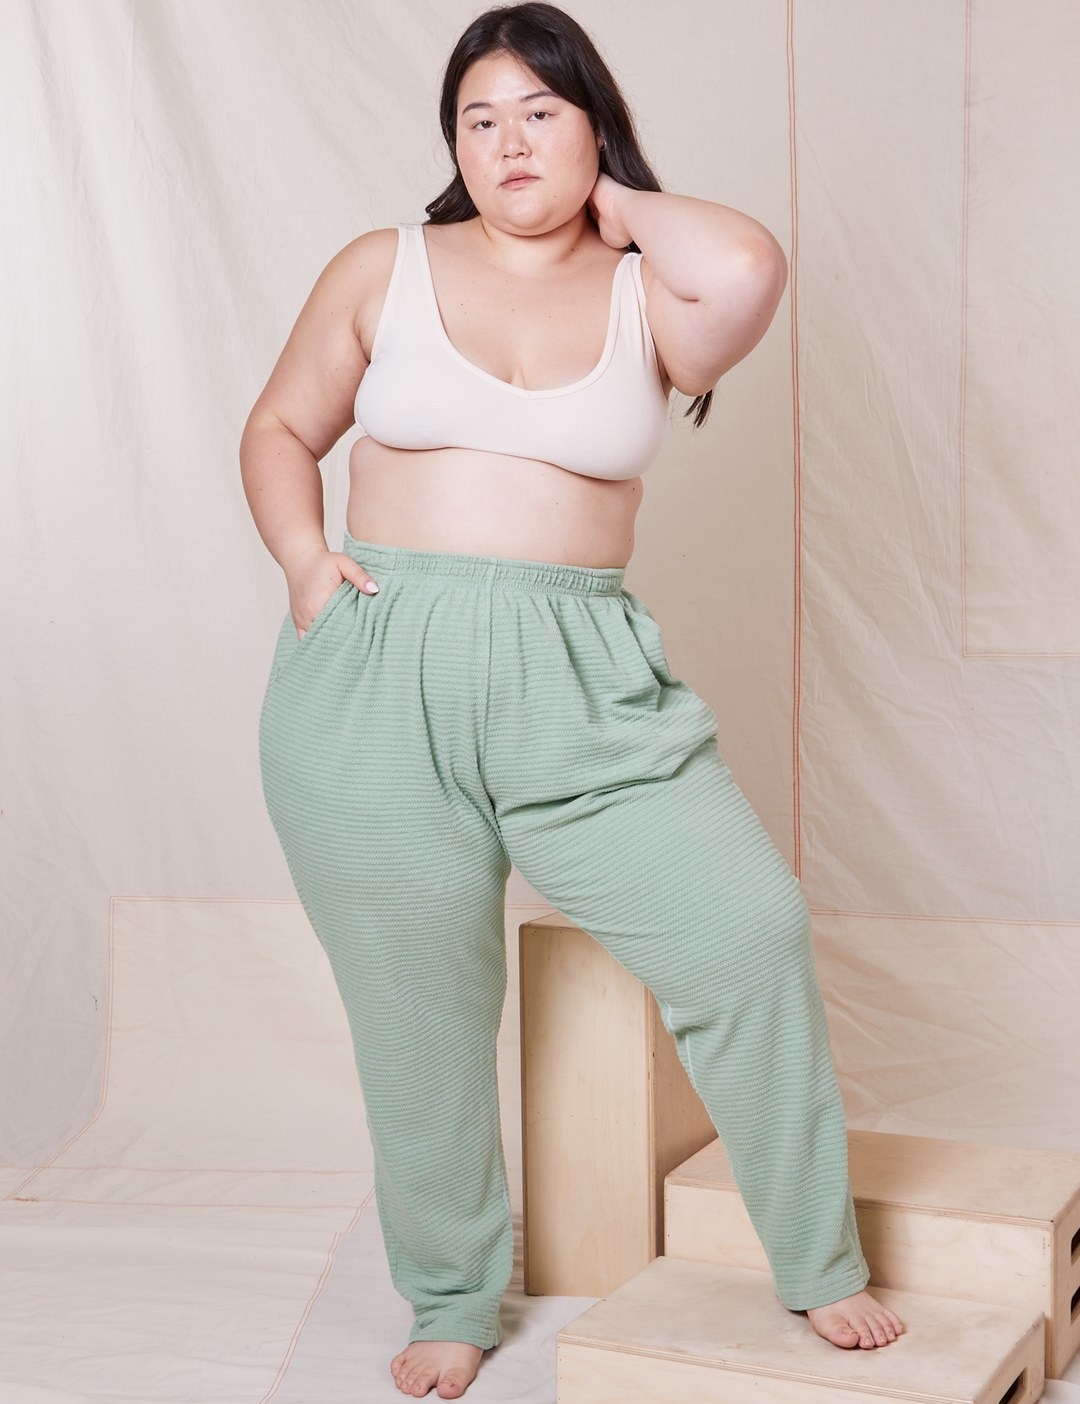 Model is wearing sage green pants and a white bra